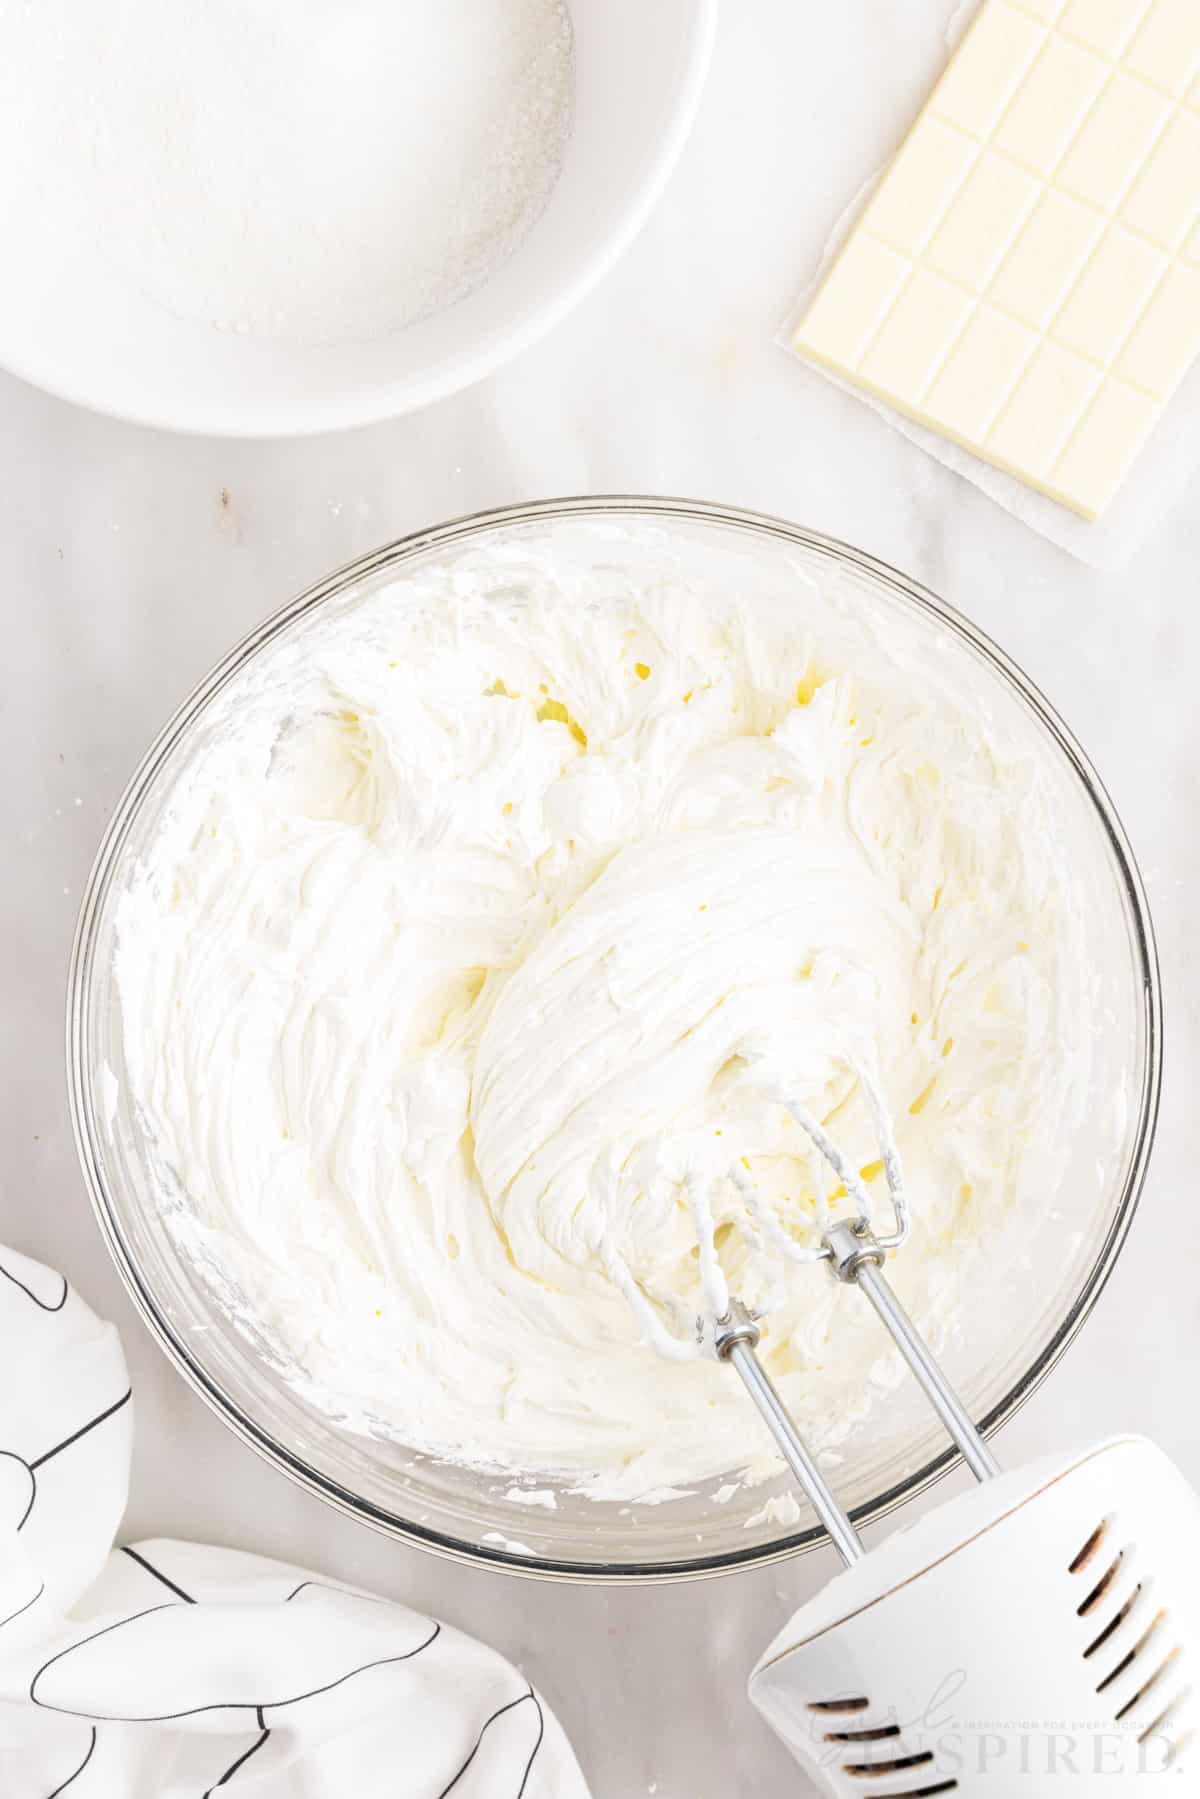 whipped cream layer after being mixed with the electric mixer resting on the side of the bowl